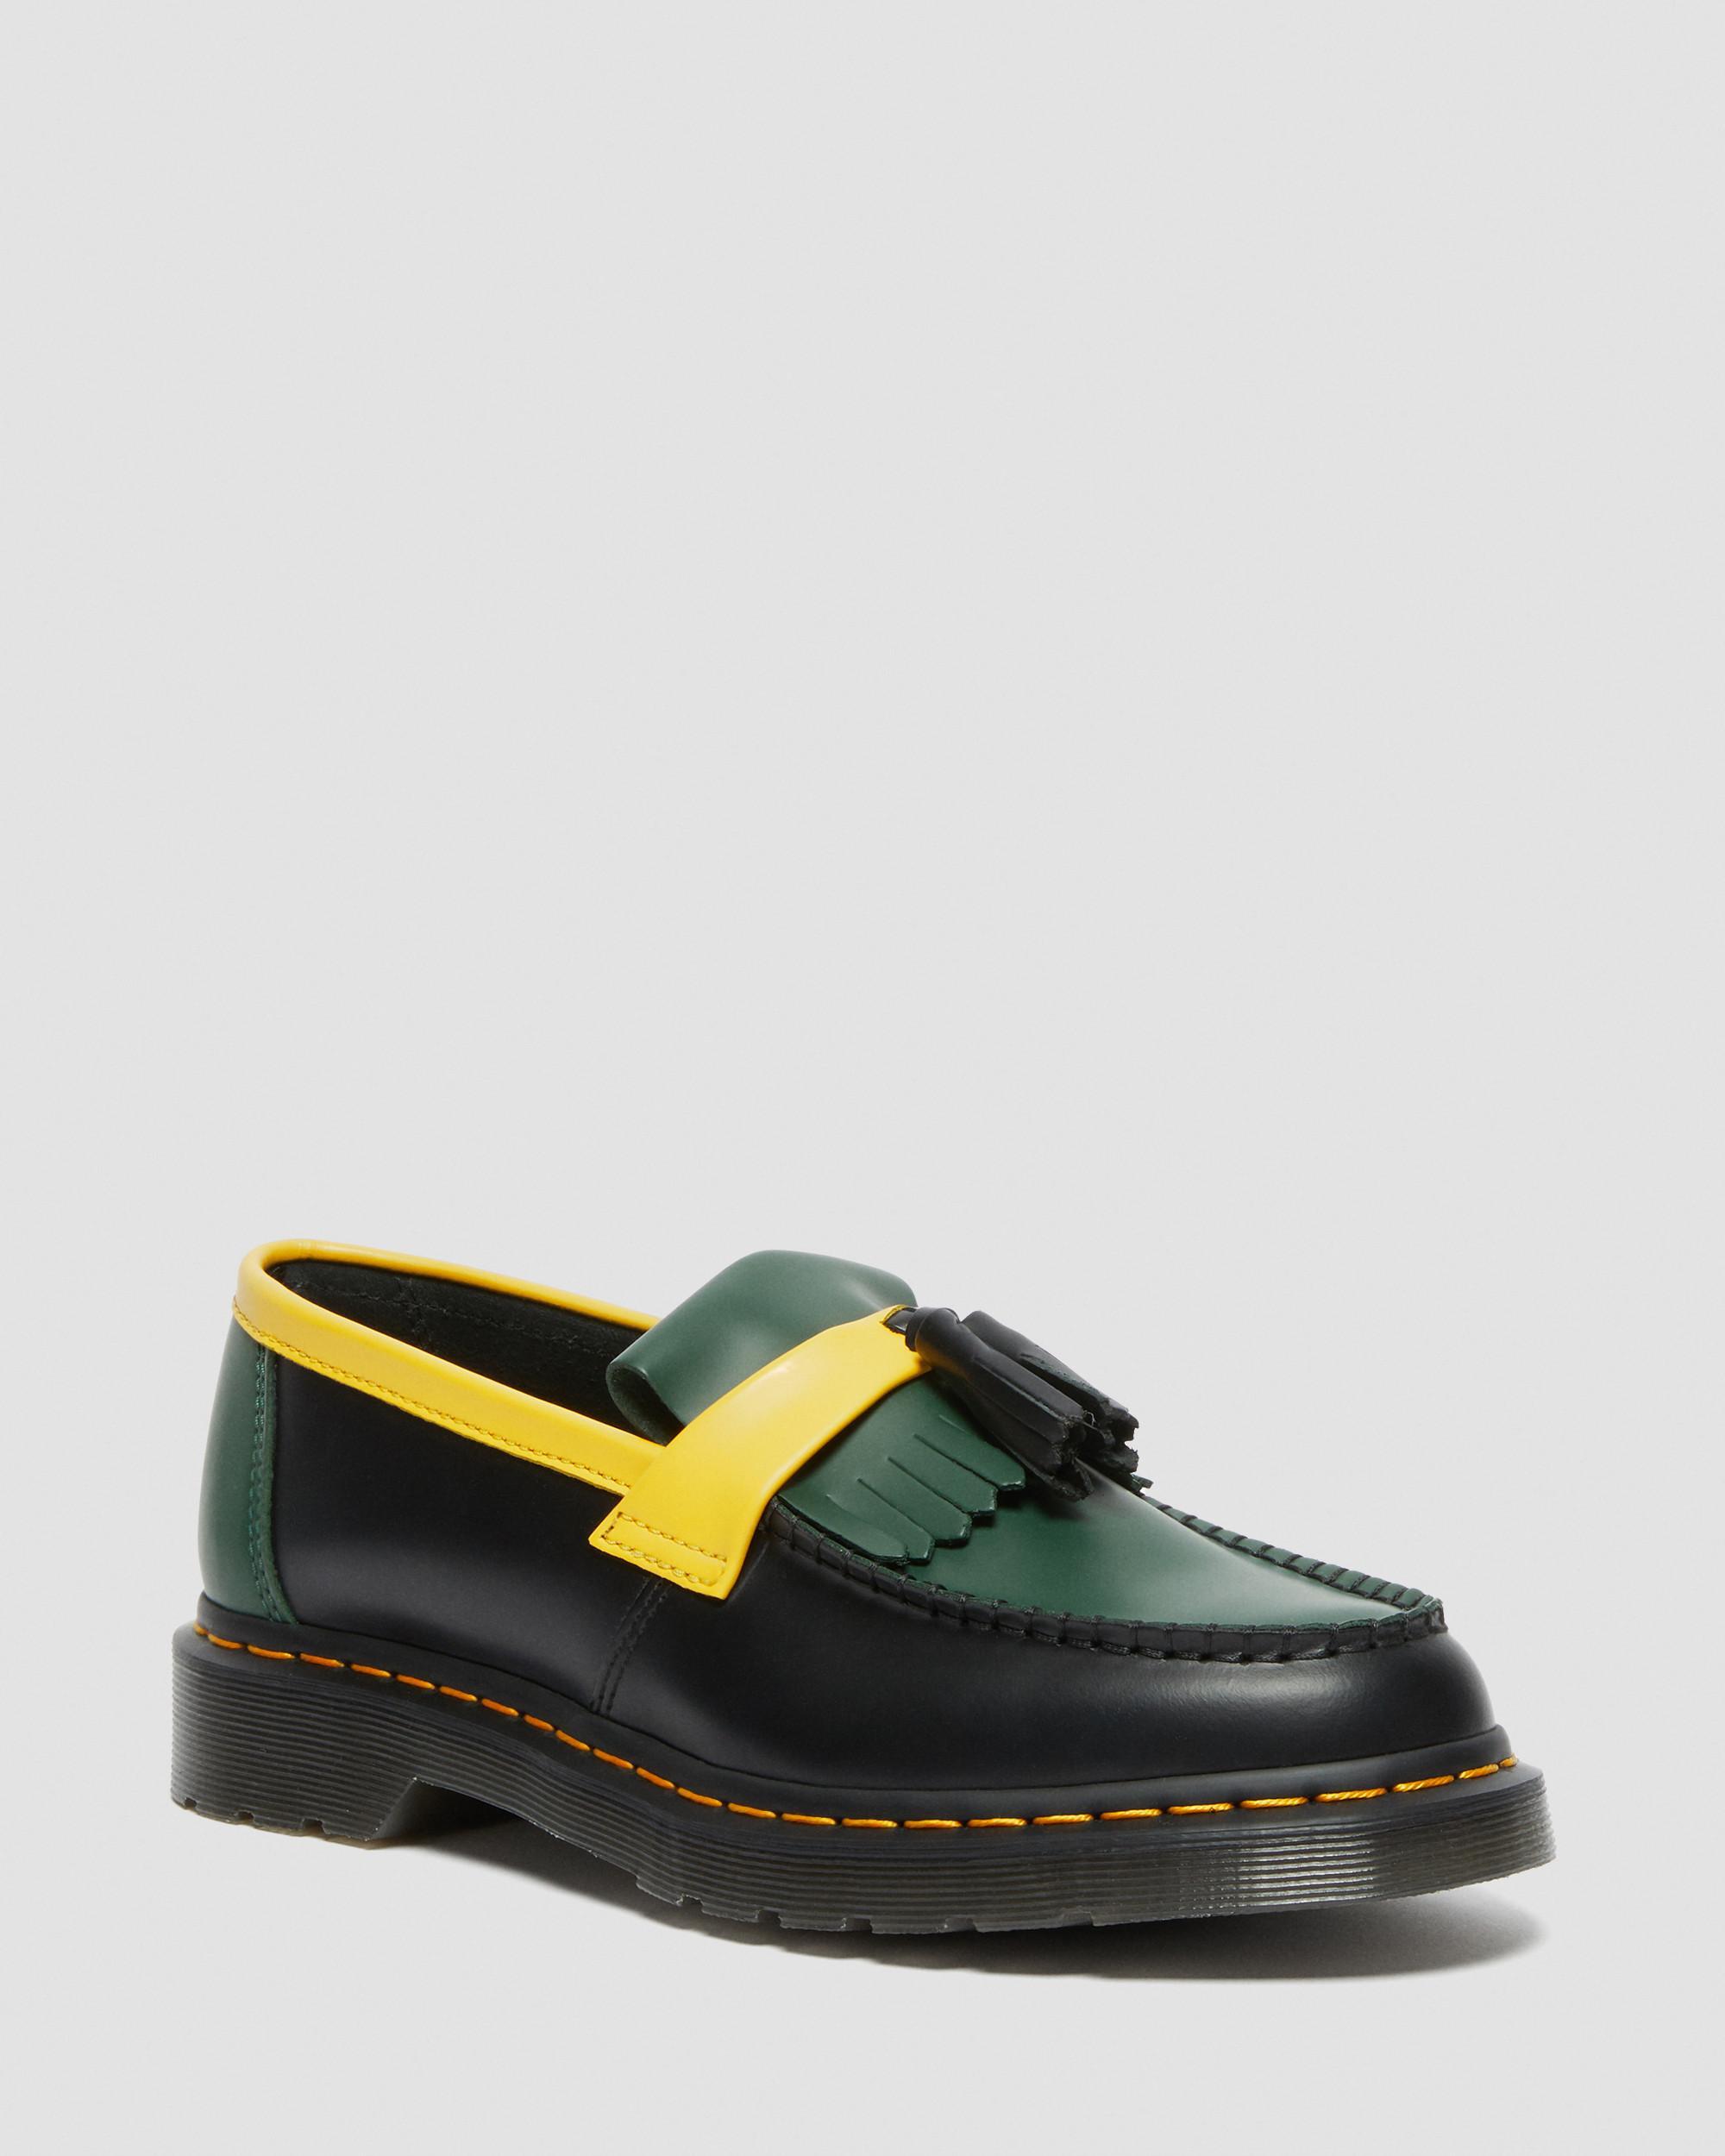 Dr. Martens Adrian Contrast Smooth Leather Tassel Loafers in Black